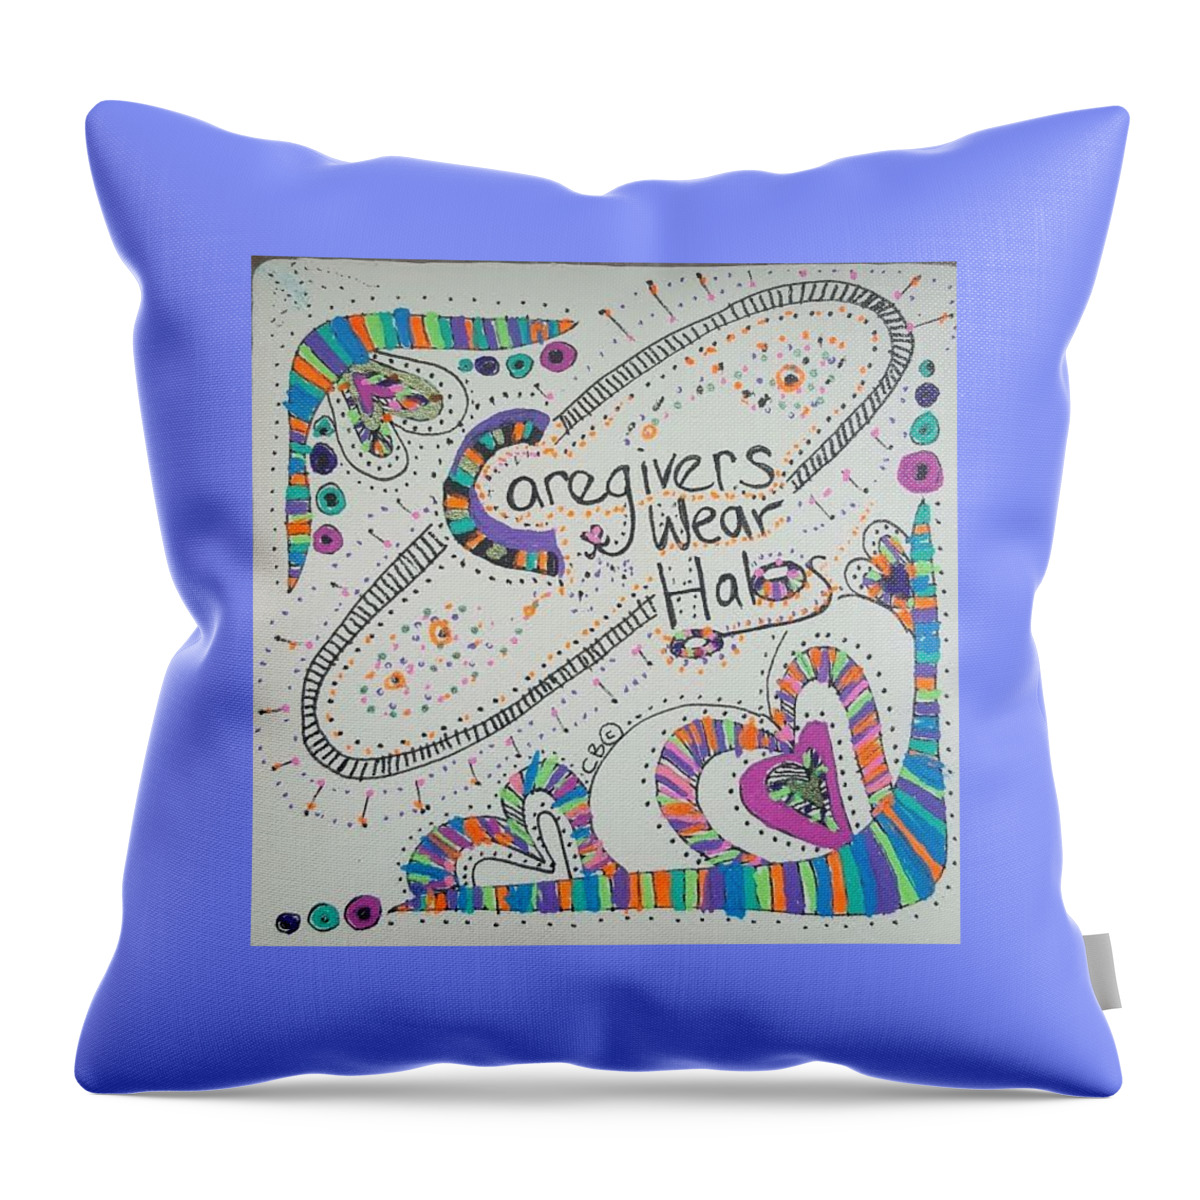 Zentangle Throw Pillow featuring the drawing Halos by Carole Brecht